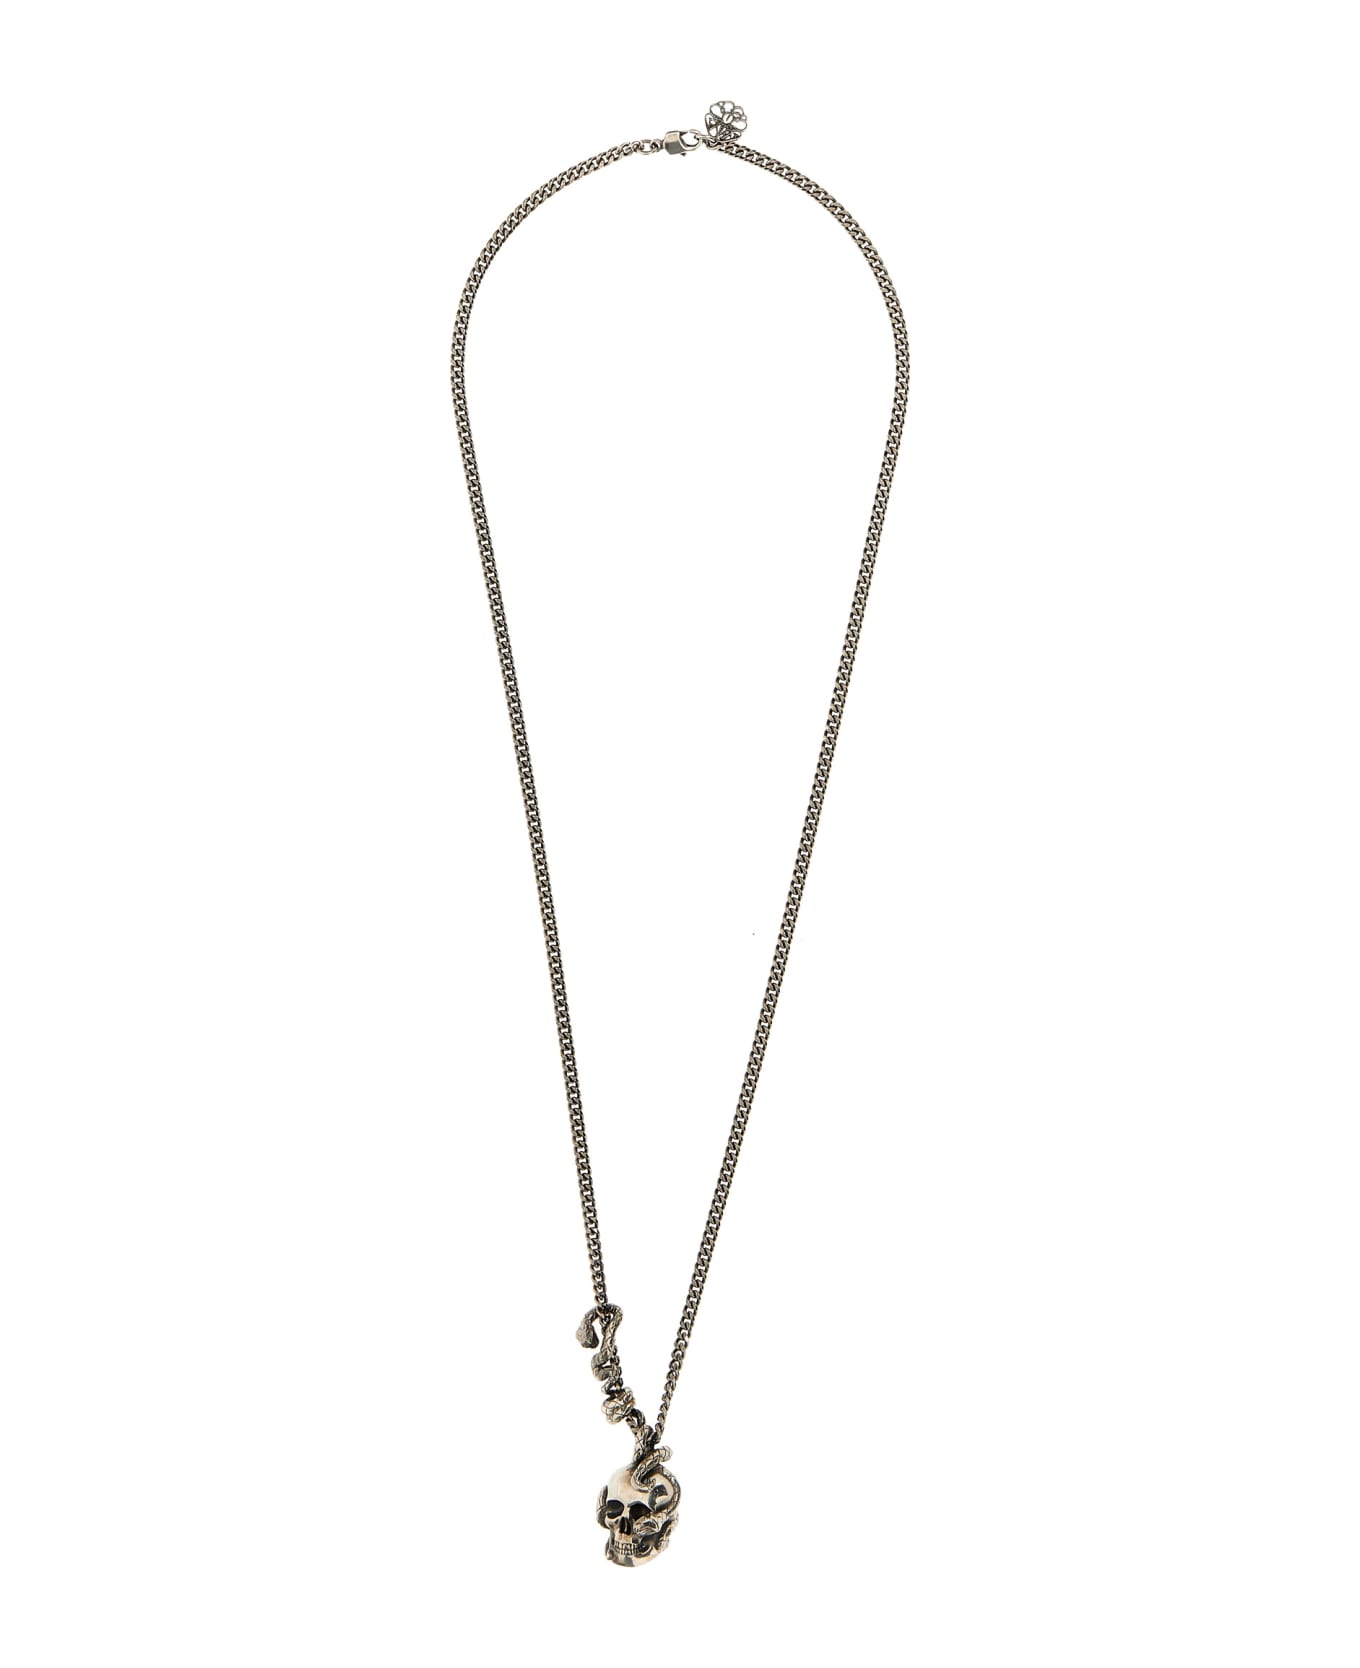 Alexander McQueen Skull And Snake Necklace - Silver ネックレス